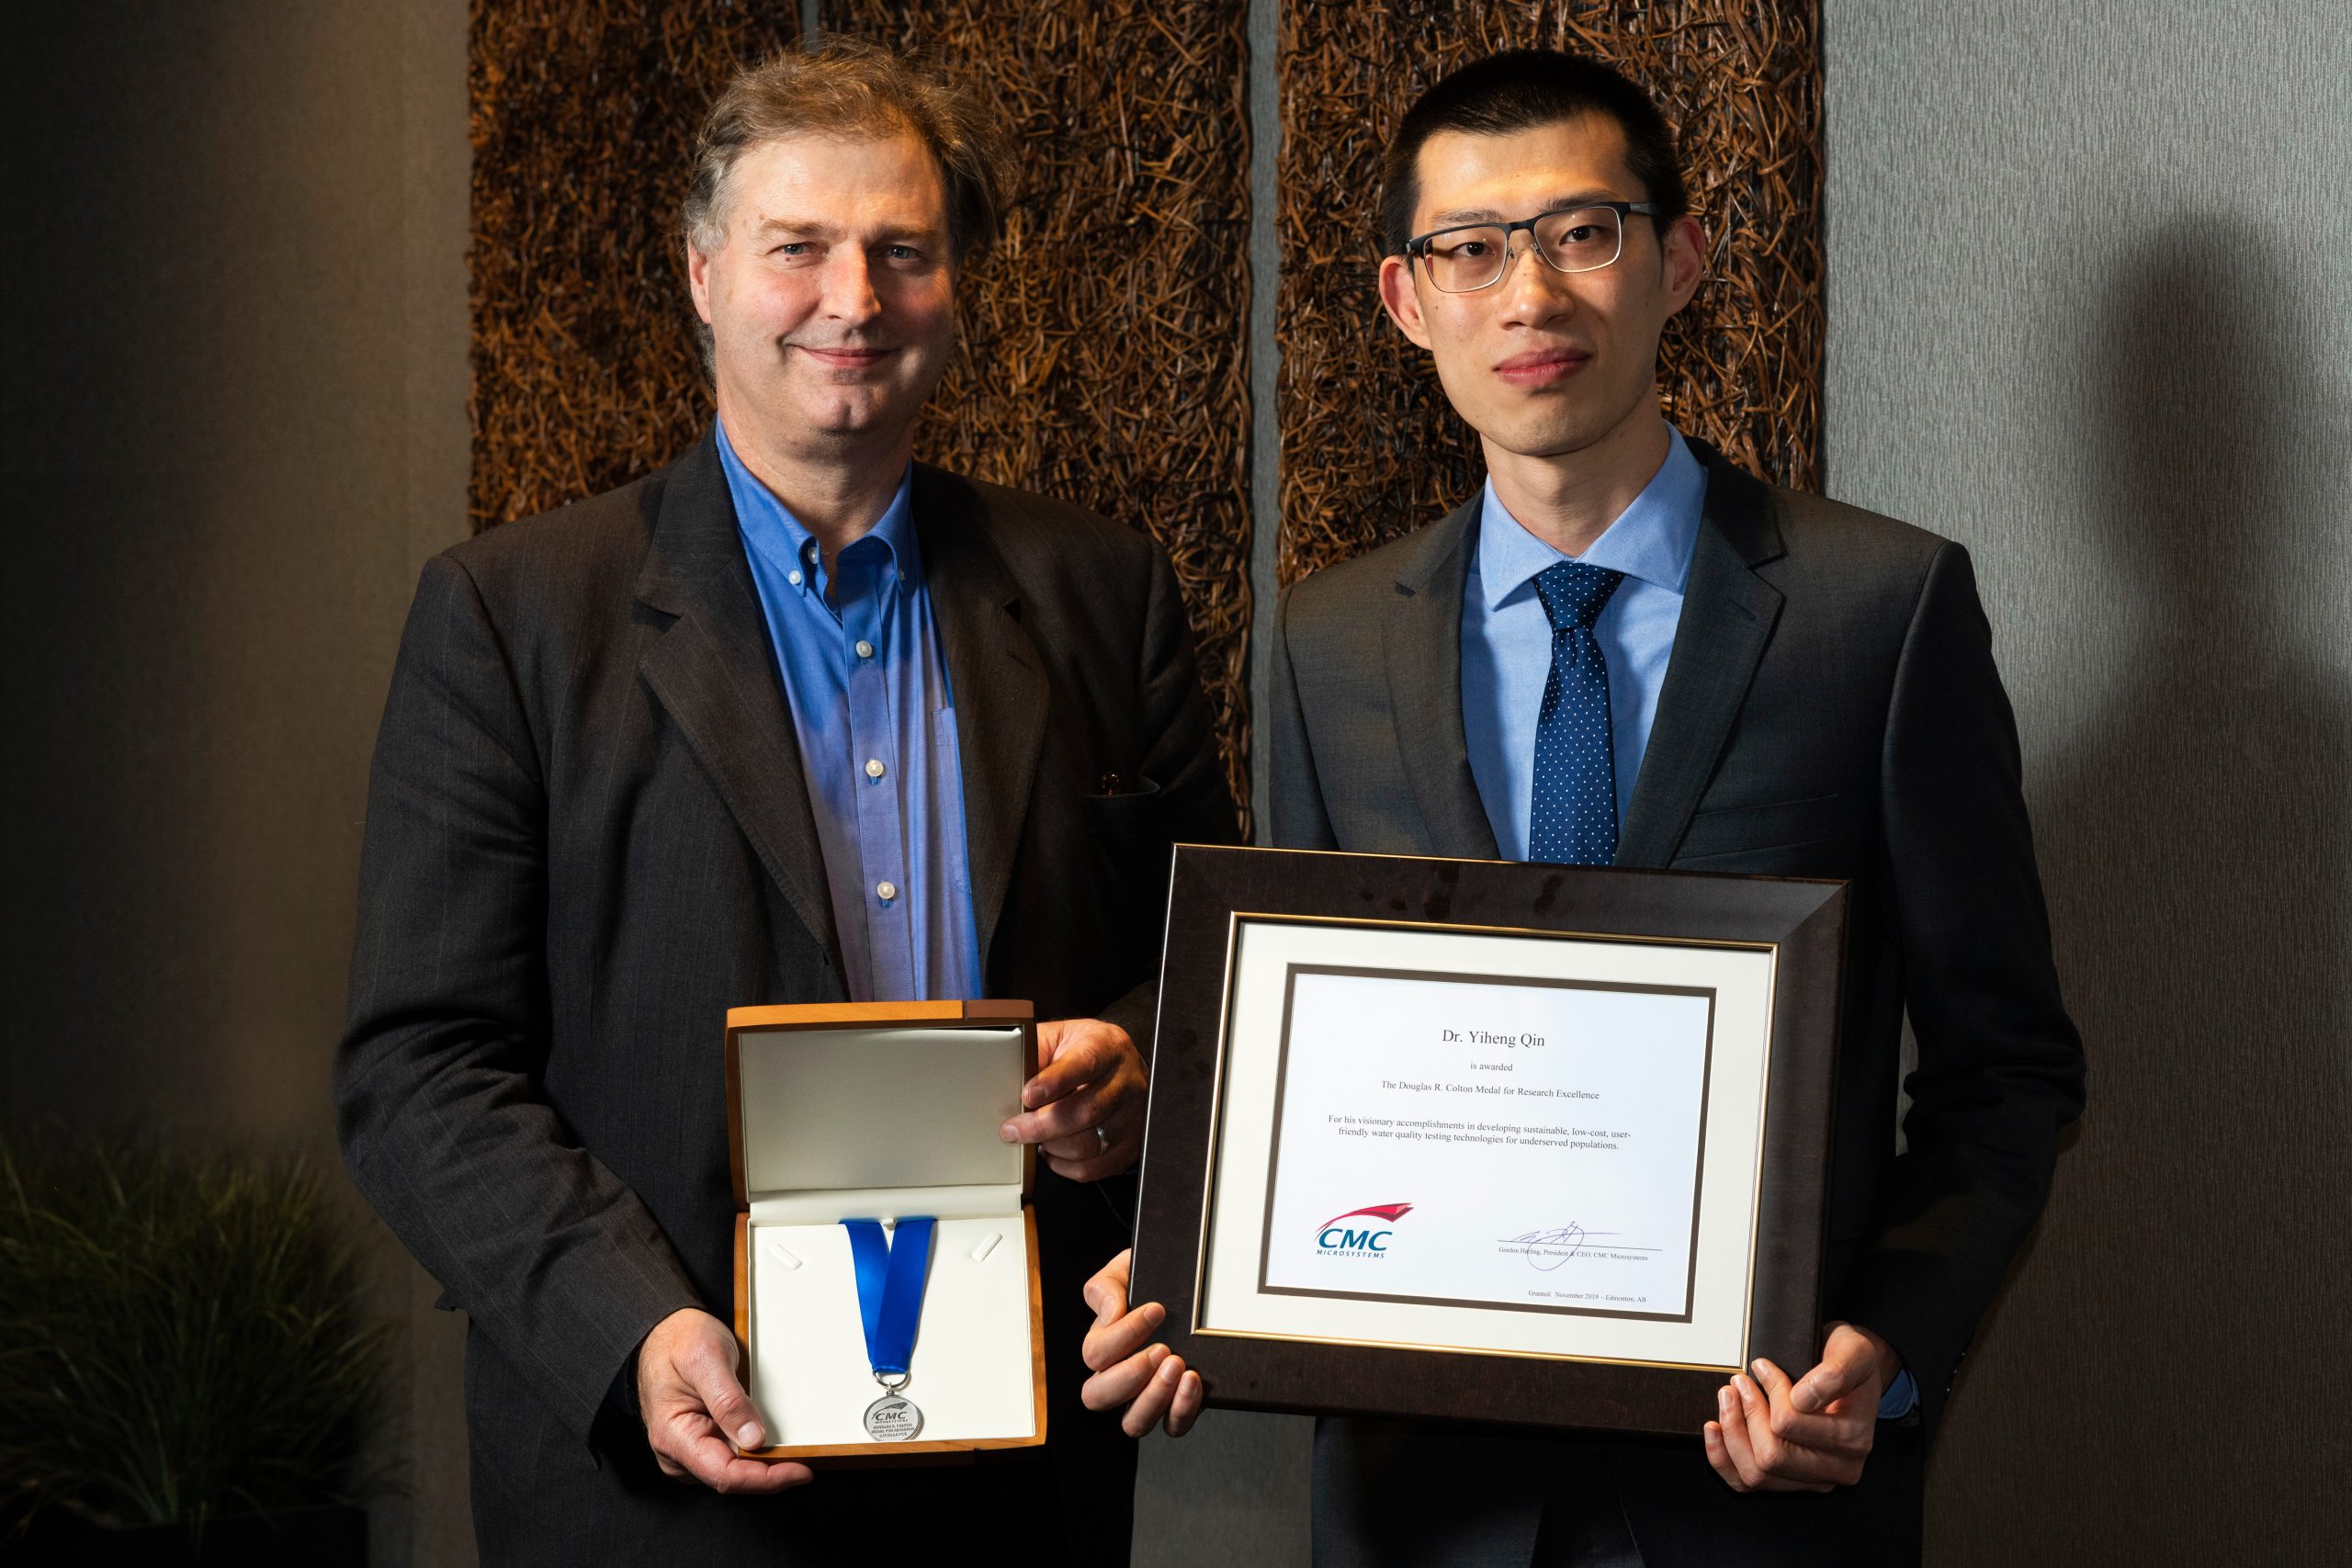 Photo of Gord Harling and Dr. Qin holding Colton medal and certificate